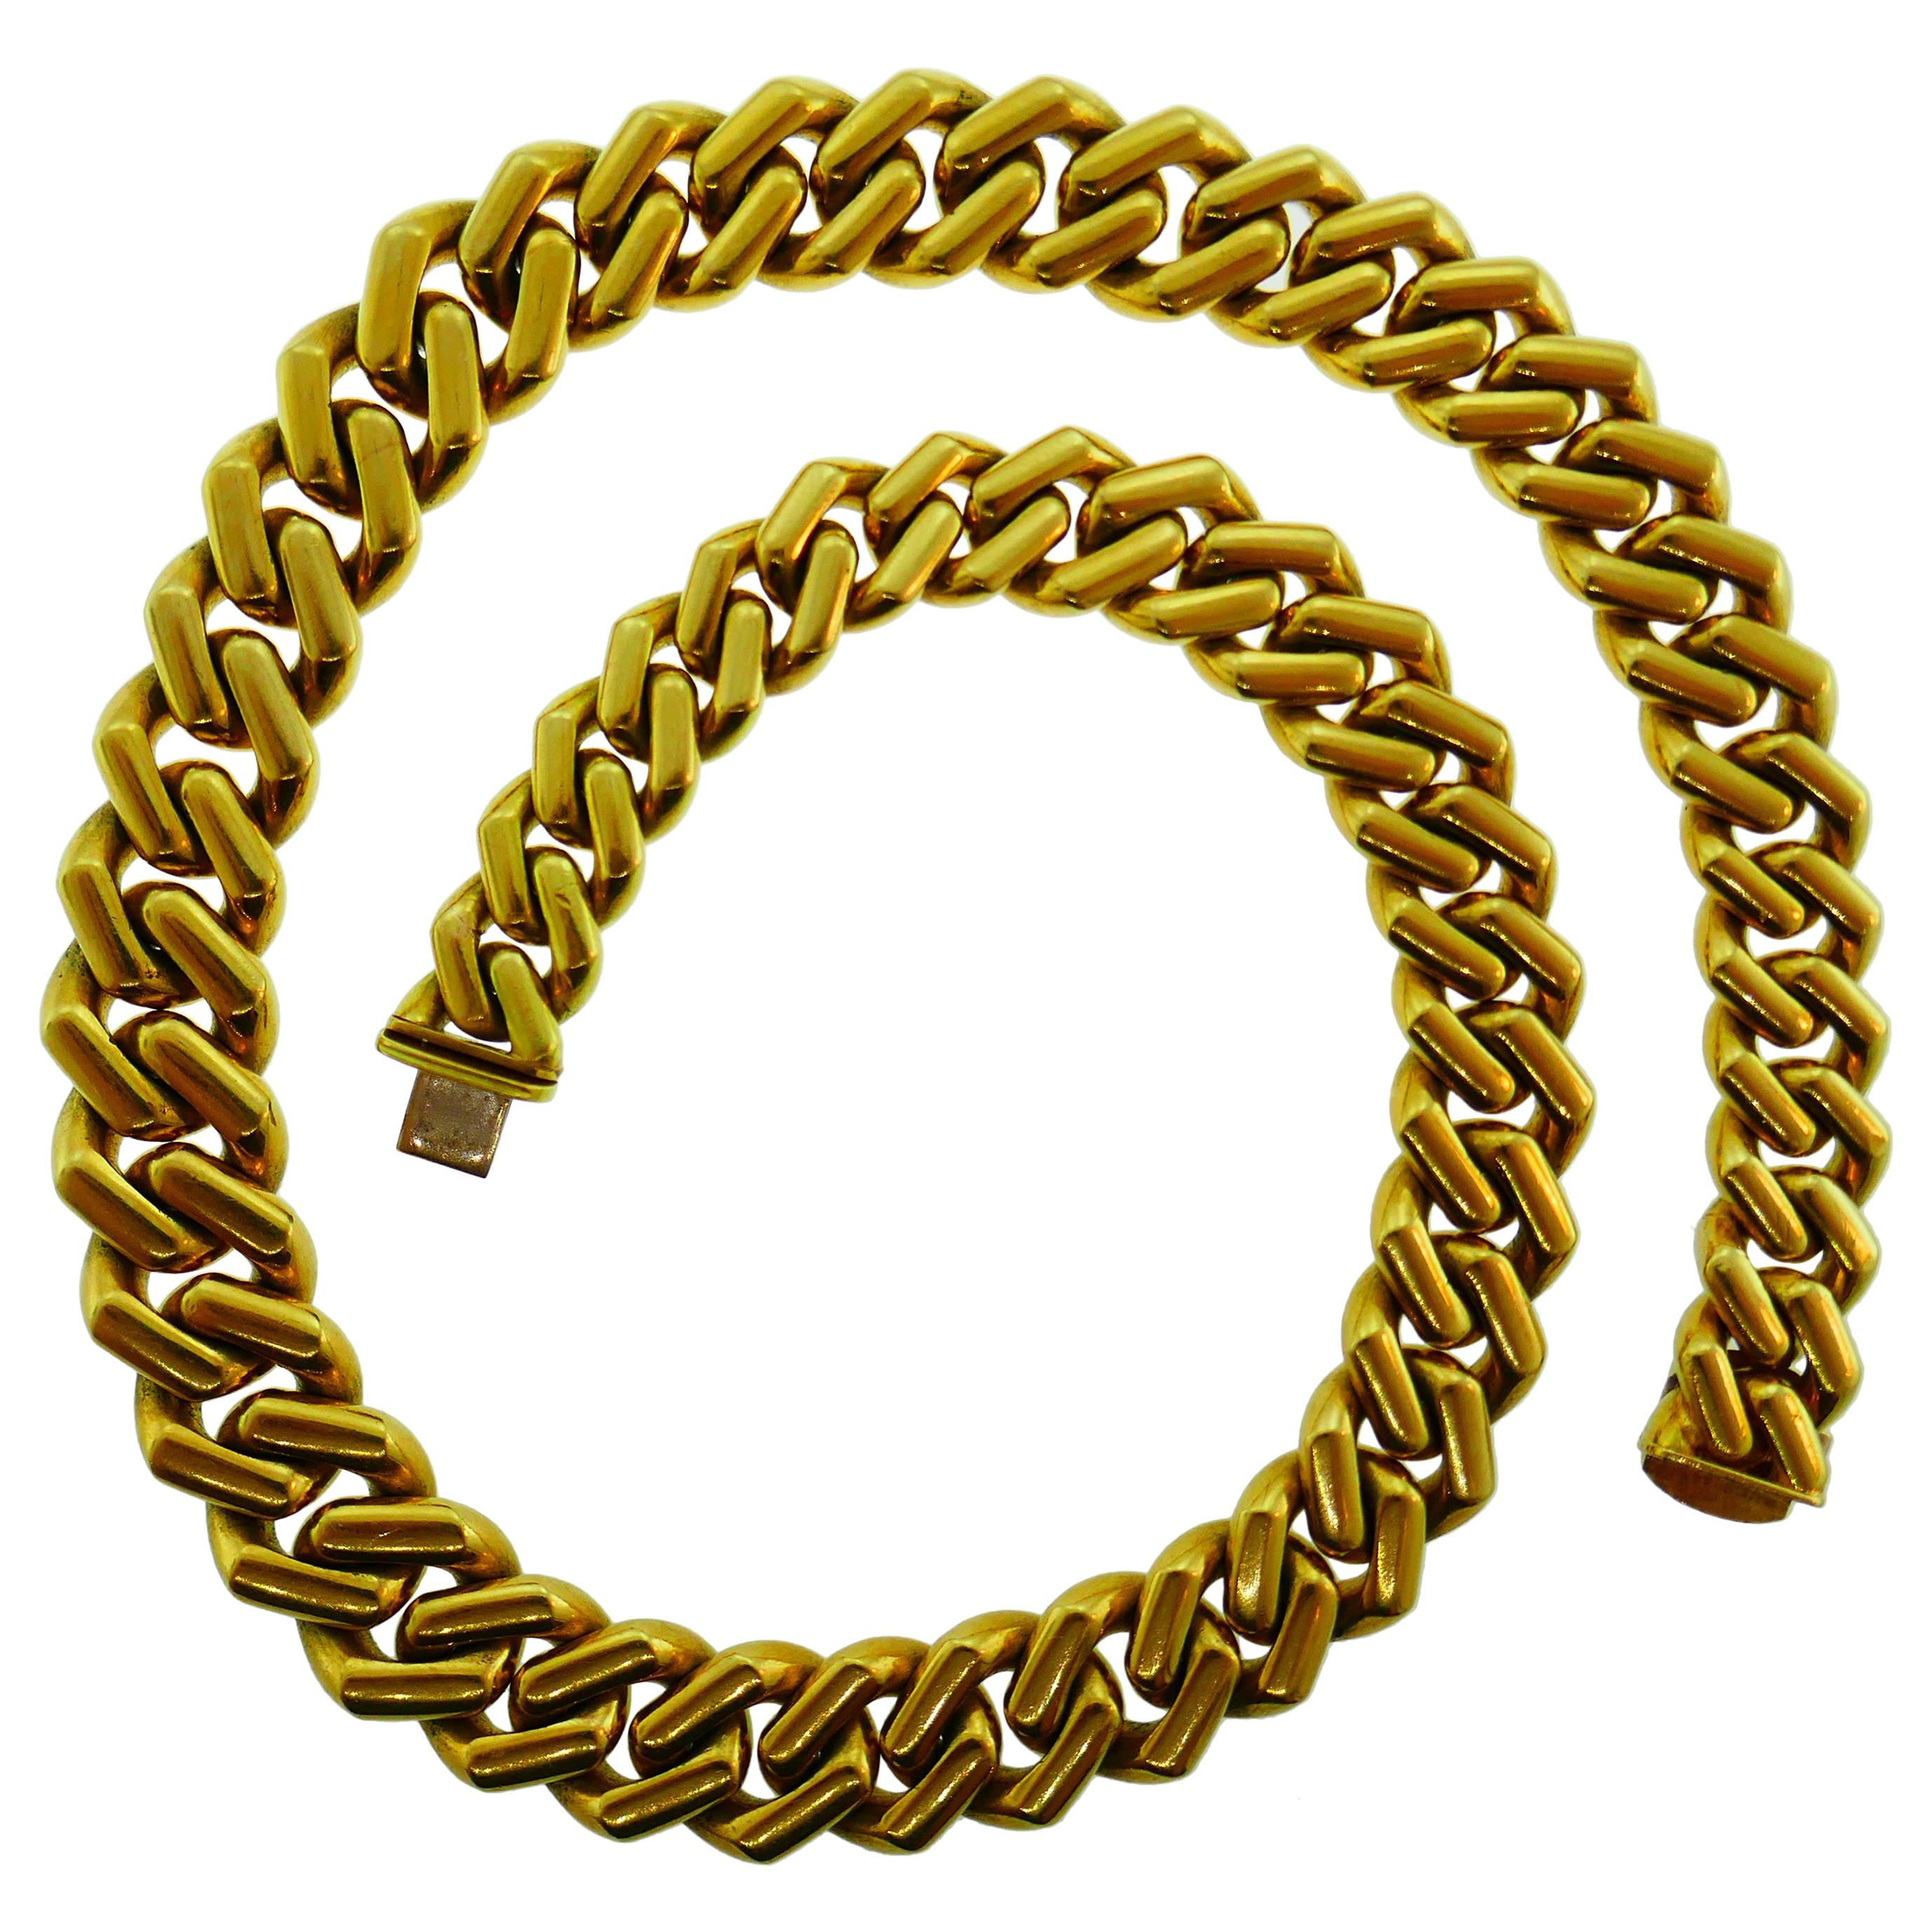 Bvlgari Italy 18k Yellow Gold Curb Link Chain Necklace Vintage circa 1970s Heavy